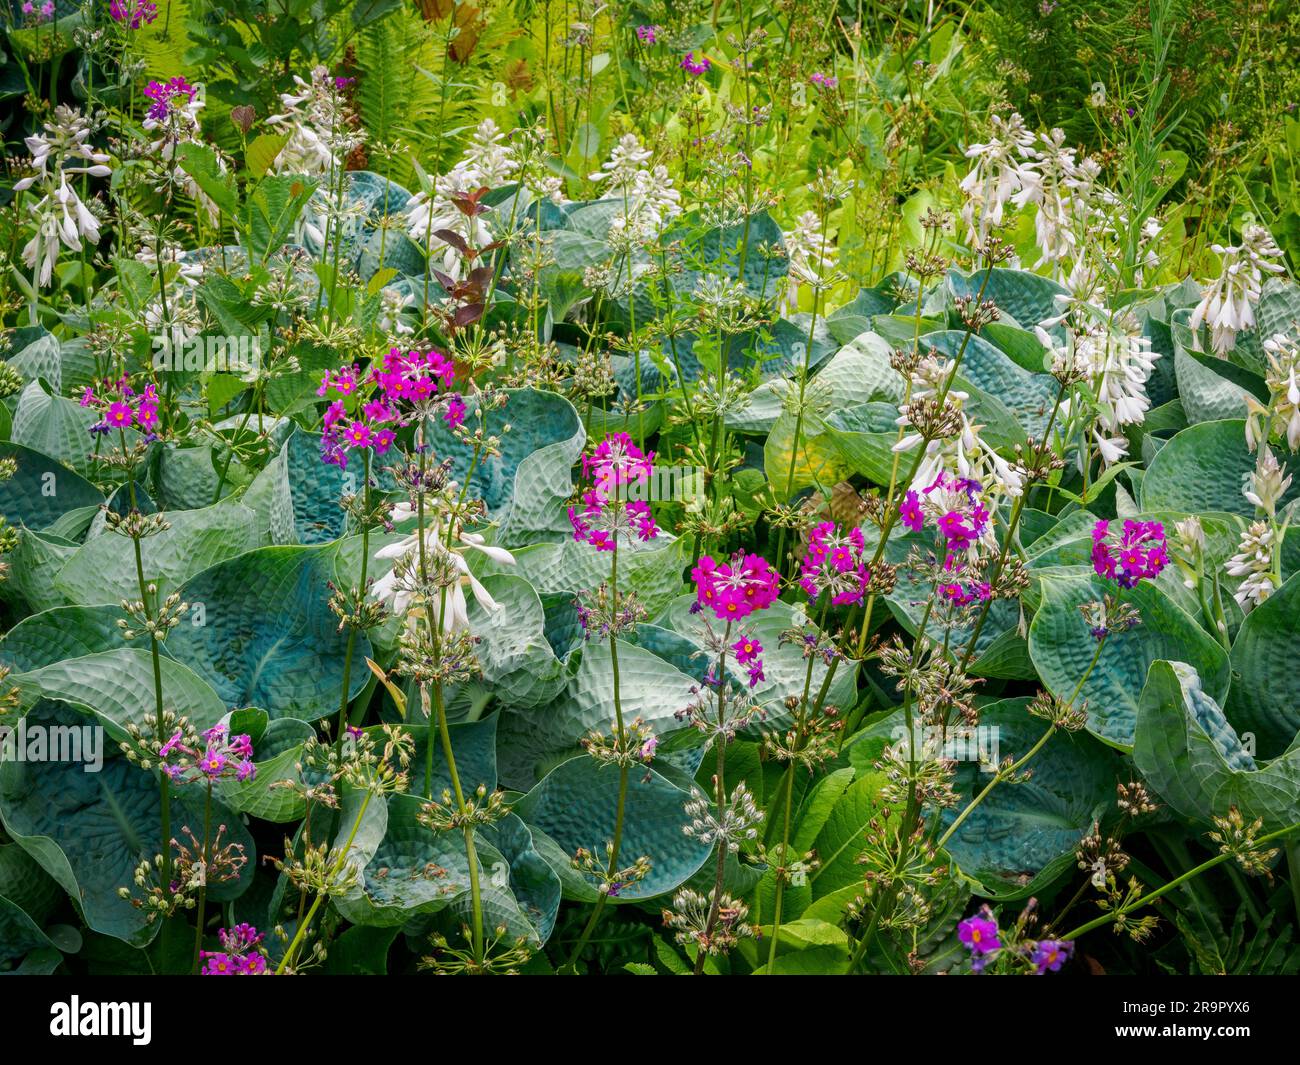 Damp woodland garden with mixed planting of cerise Candelabra Primulas and Hosta sieboldii at Aberglasney Gardens in South Wales UK Stock Photo